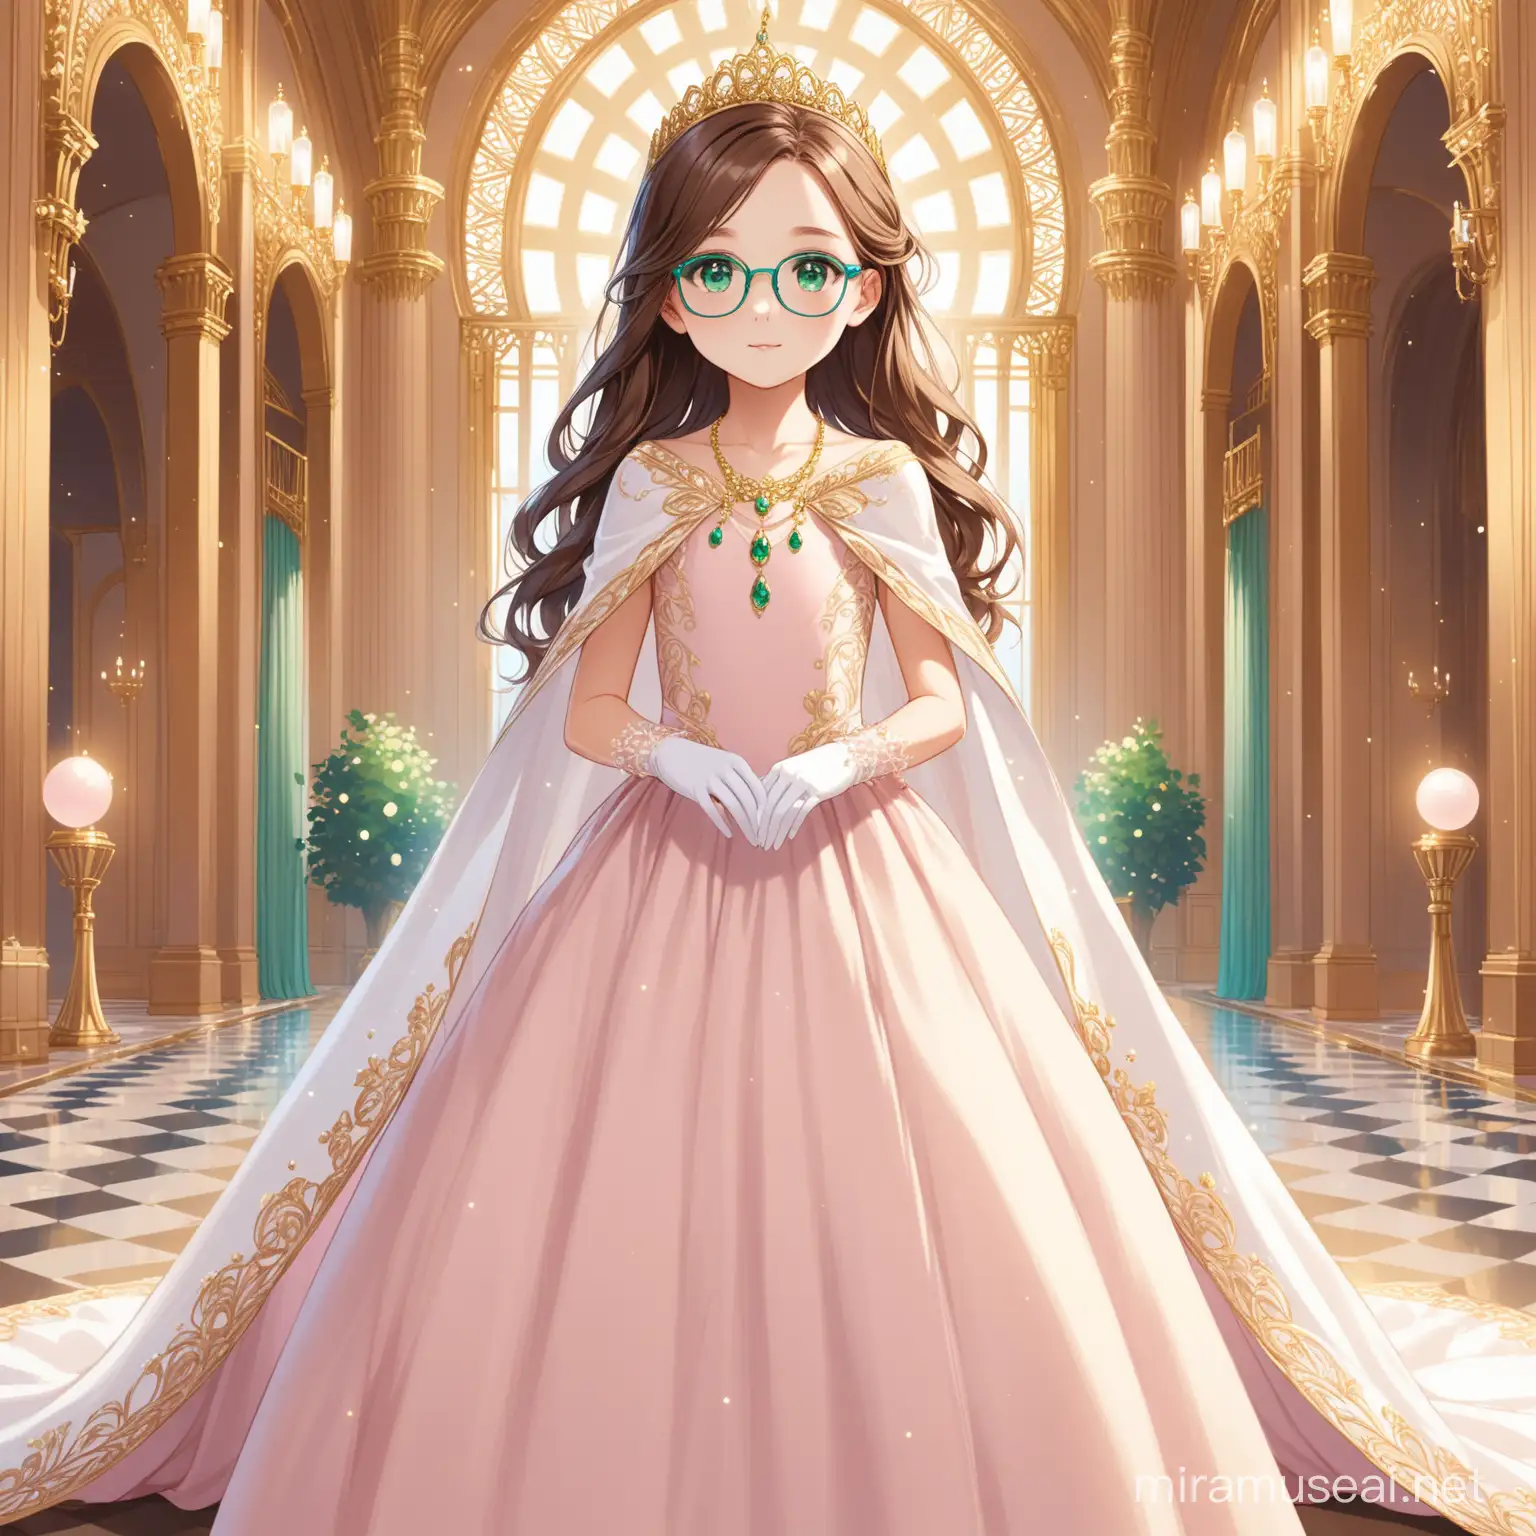 11 year old girl, long flowy brown hair, pale pink ball gown, white evening gloves, green eyes, blue glasses, dainty white shoes, gold necklace, fancy palace, white flowy cape,